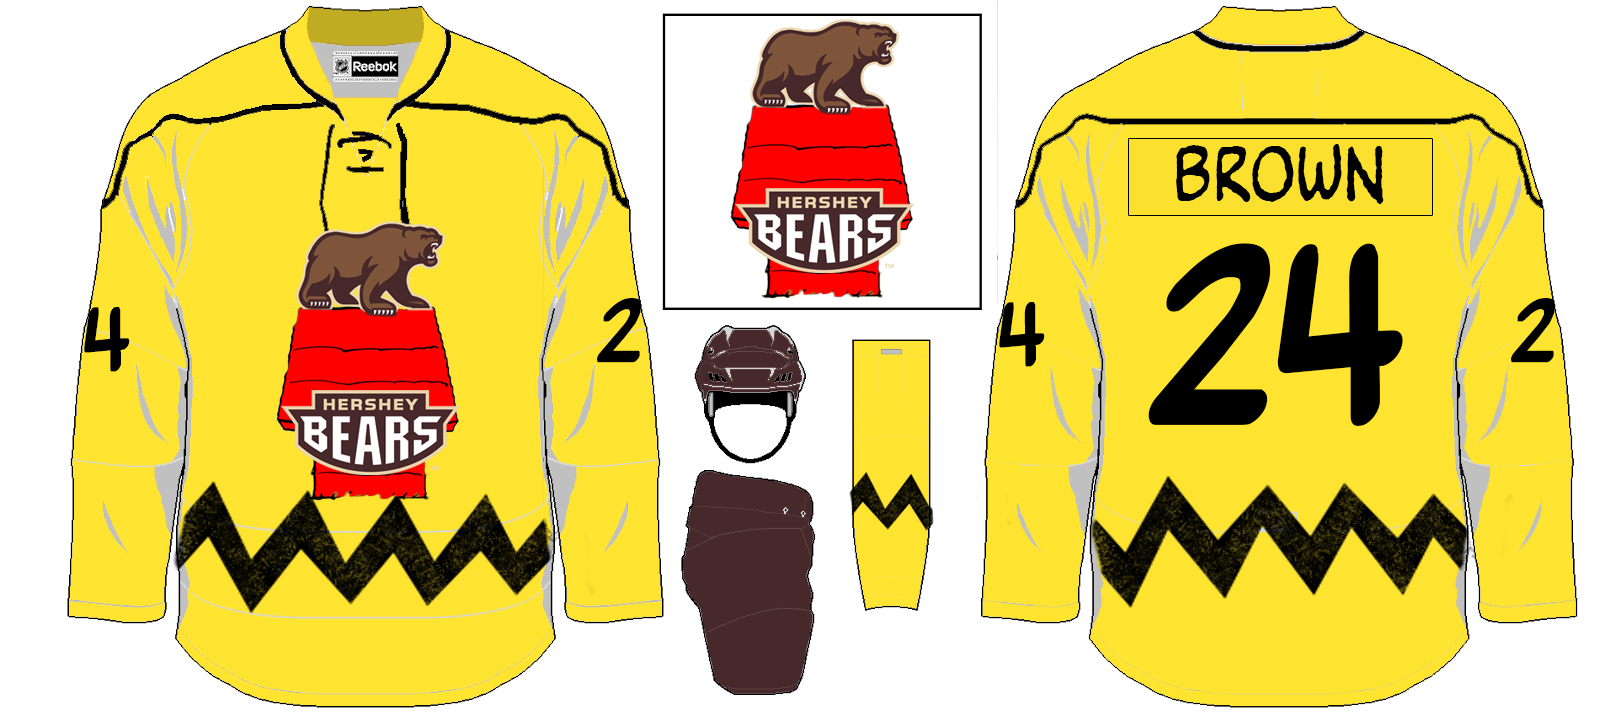 Hershey Bears - Looking for Bears gear? While the Giant